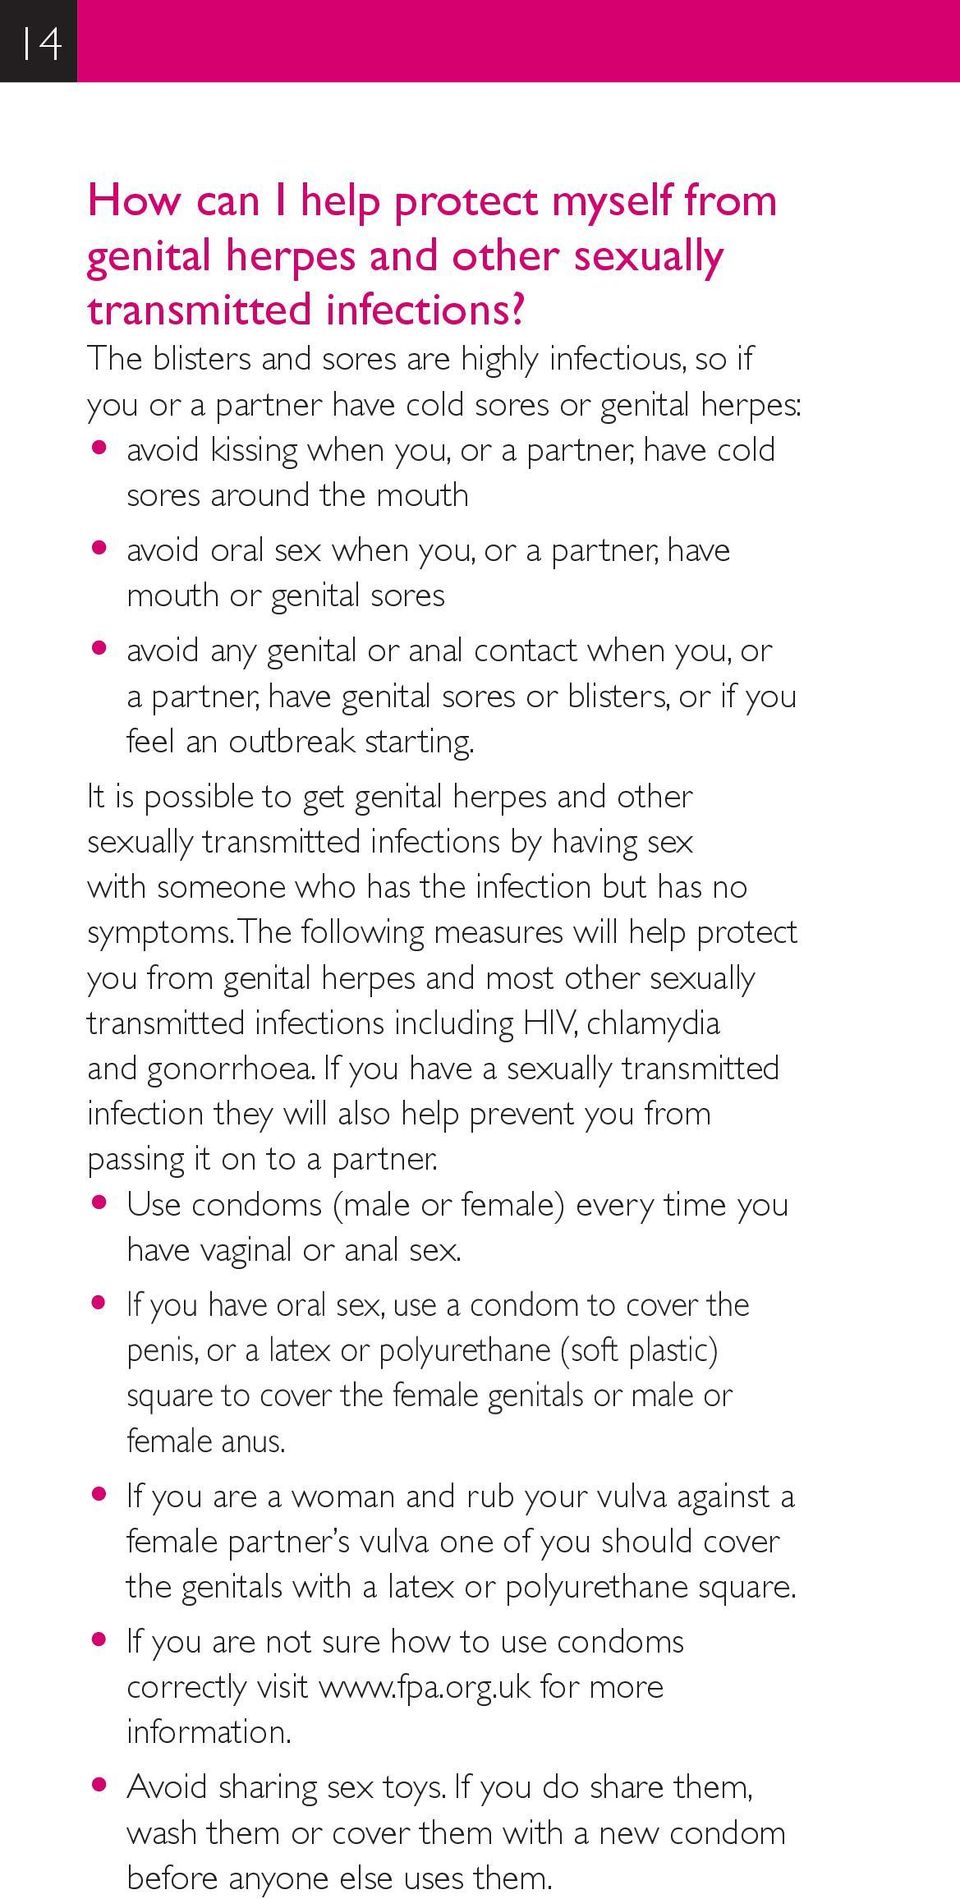 you, or a partner, have mouth or genital sores O avoid any genital or anal contact when you, or a partner, have genital sores or blisters, or if you feel an outbreak starting.